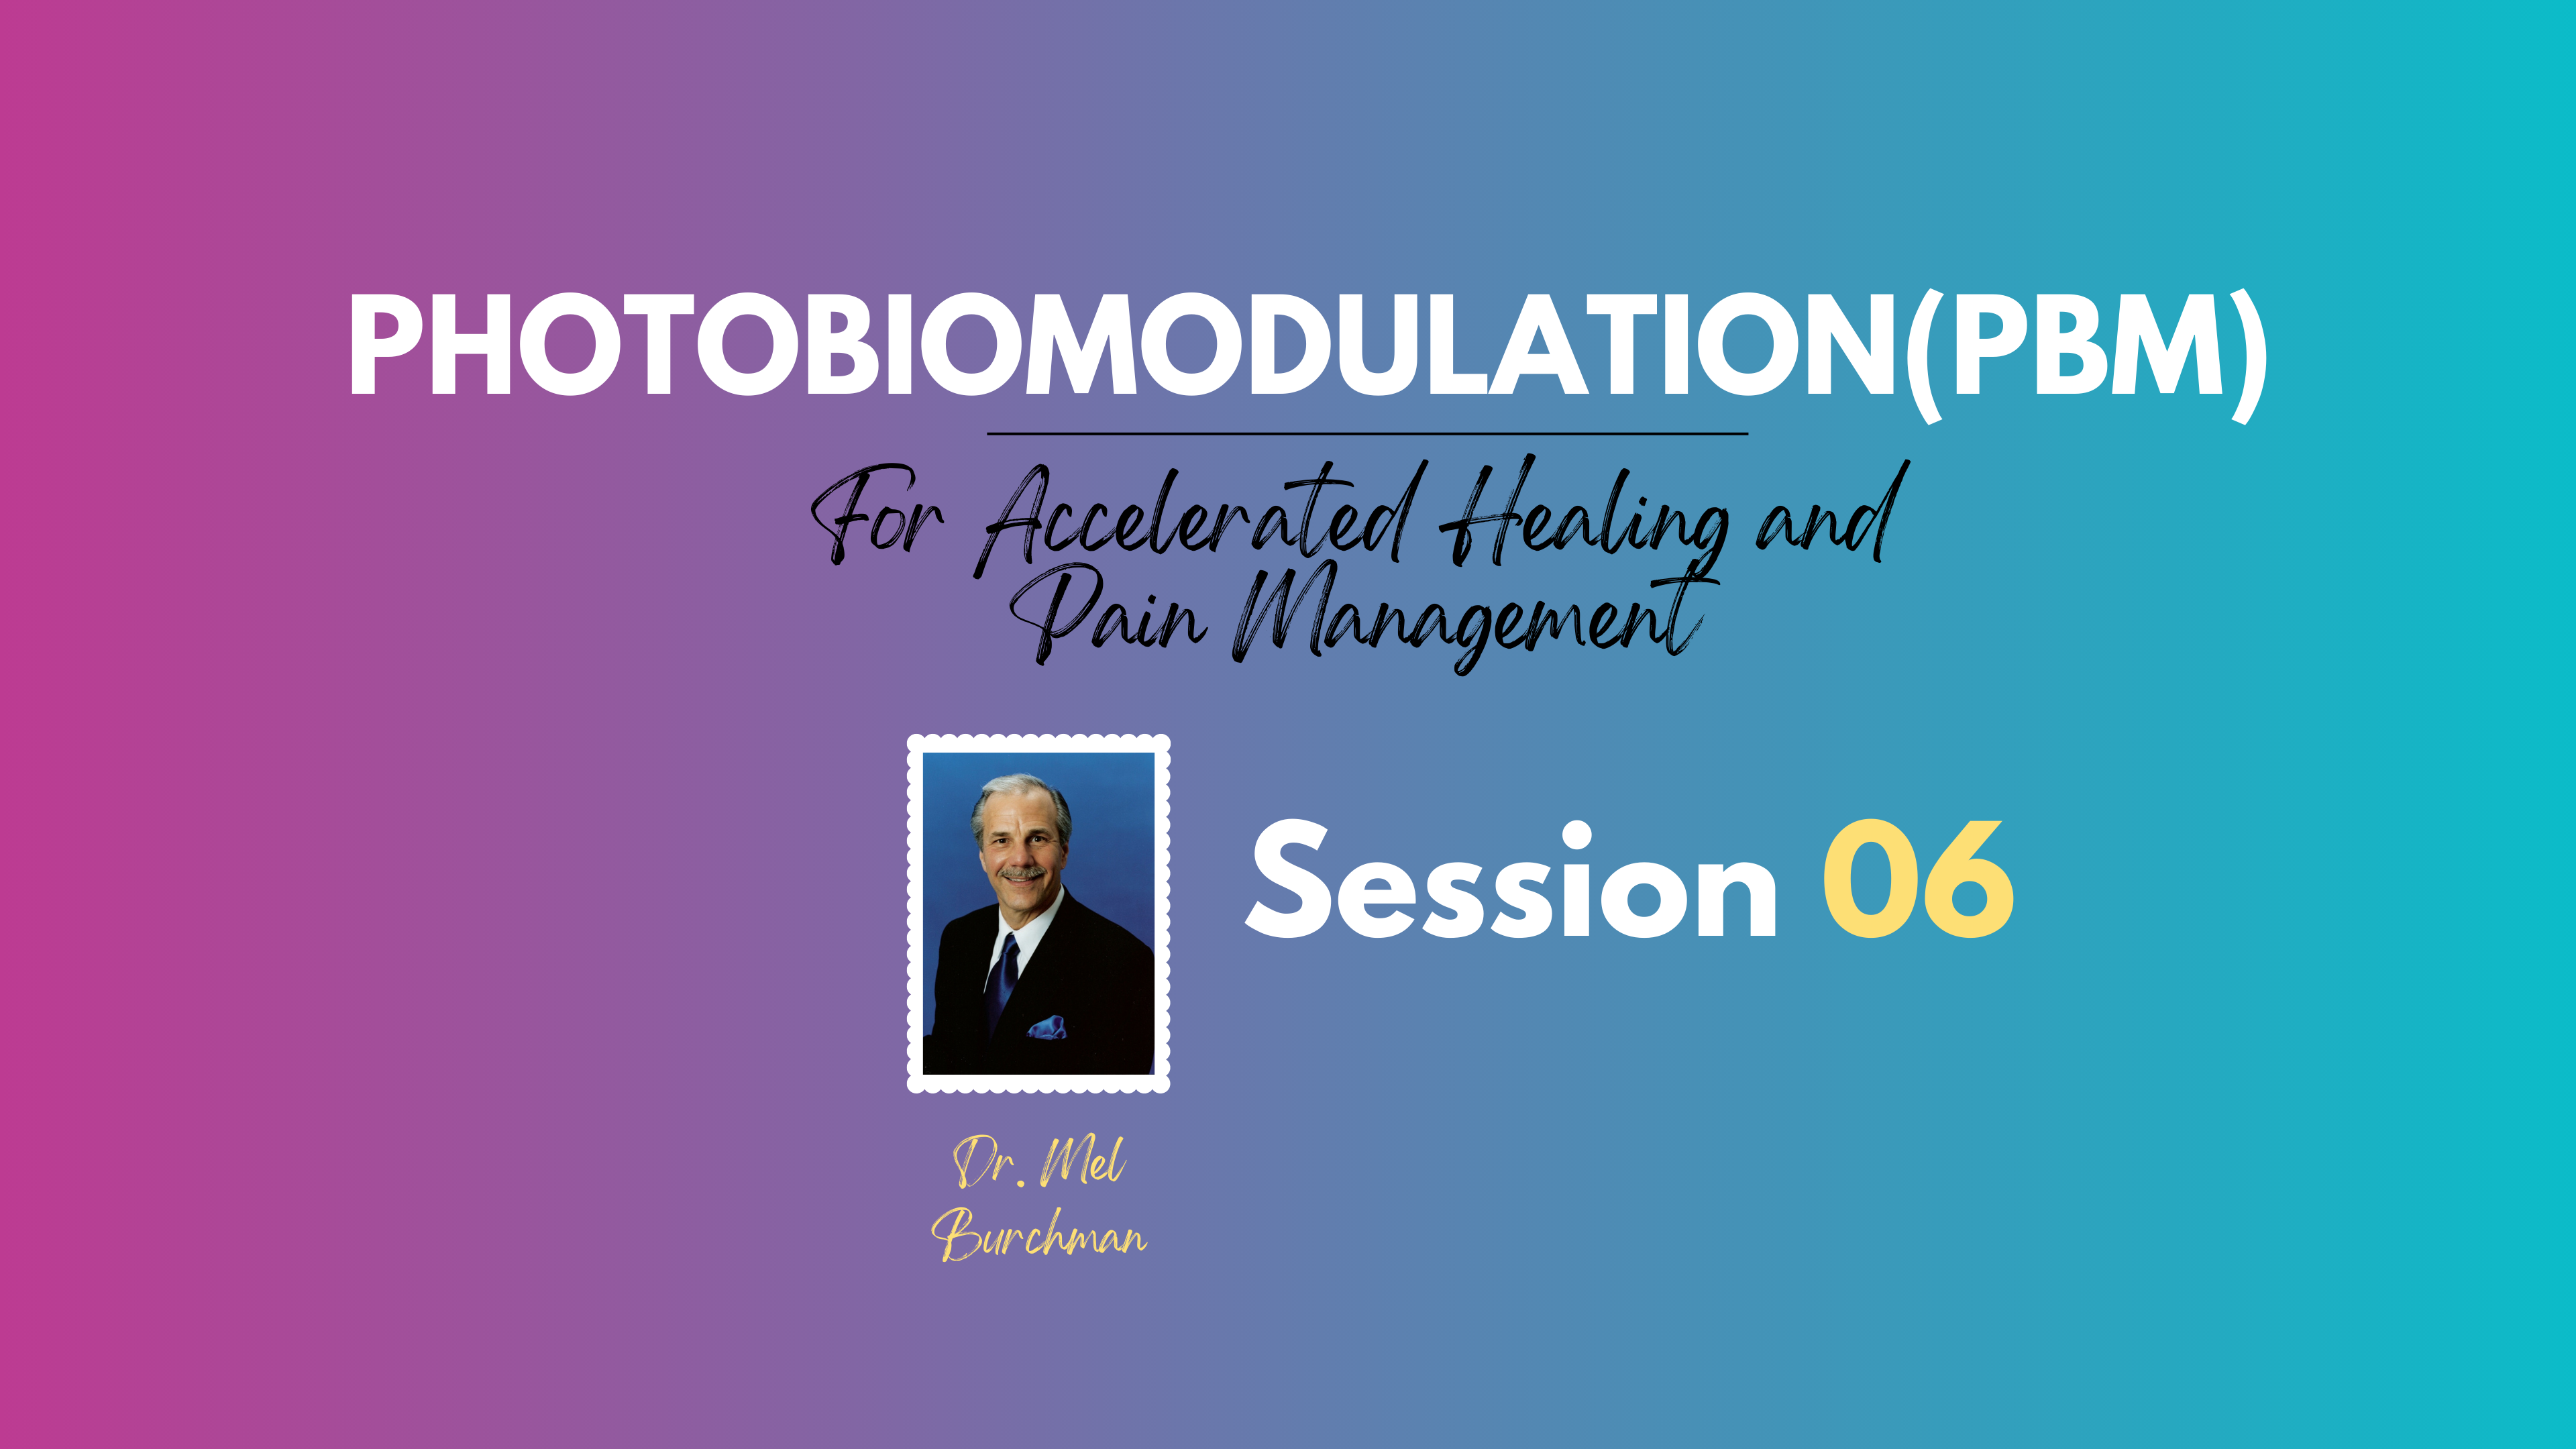 Photobiomodulation (PBM) for Accelerated Healing and Pain Management